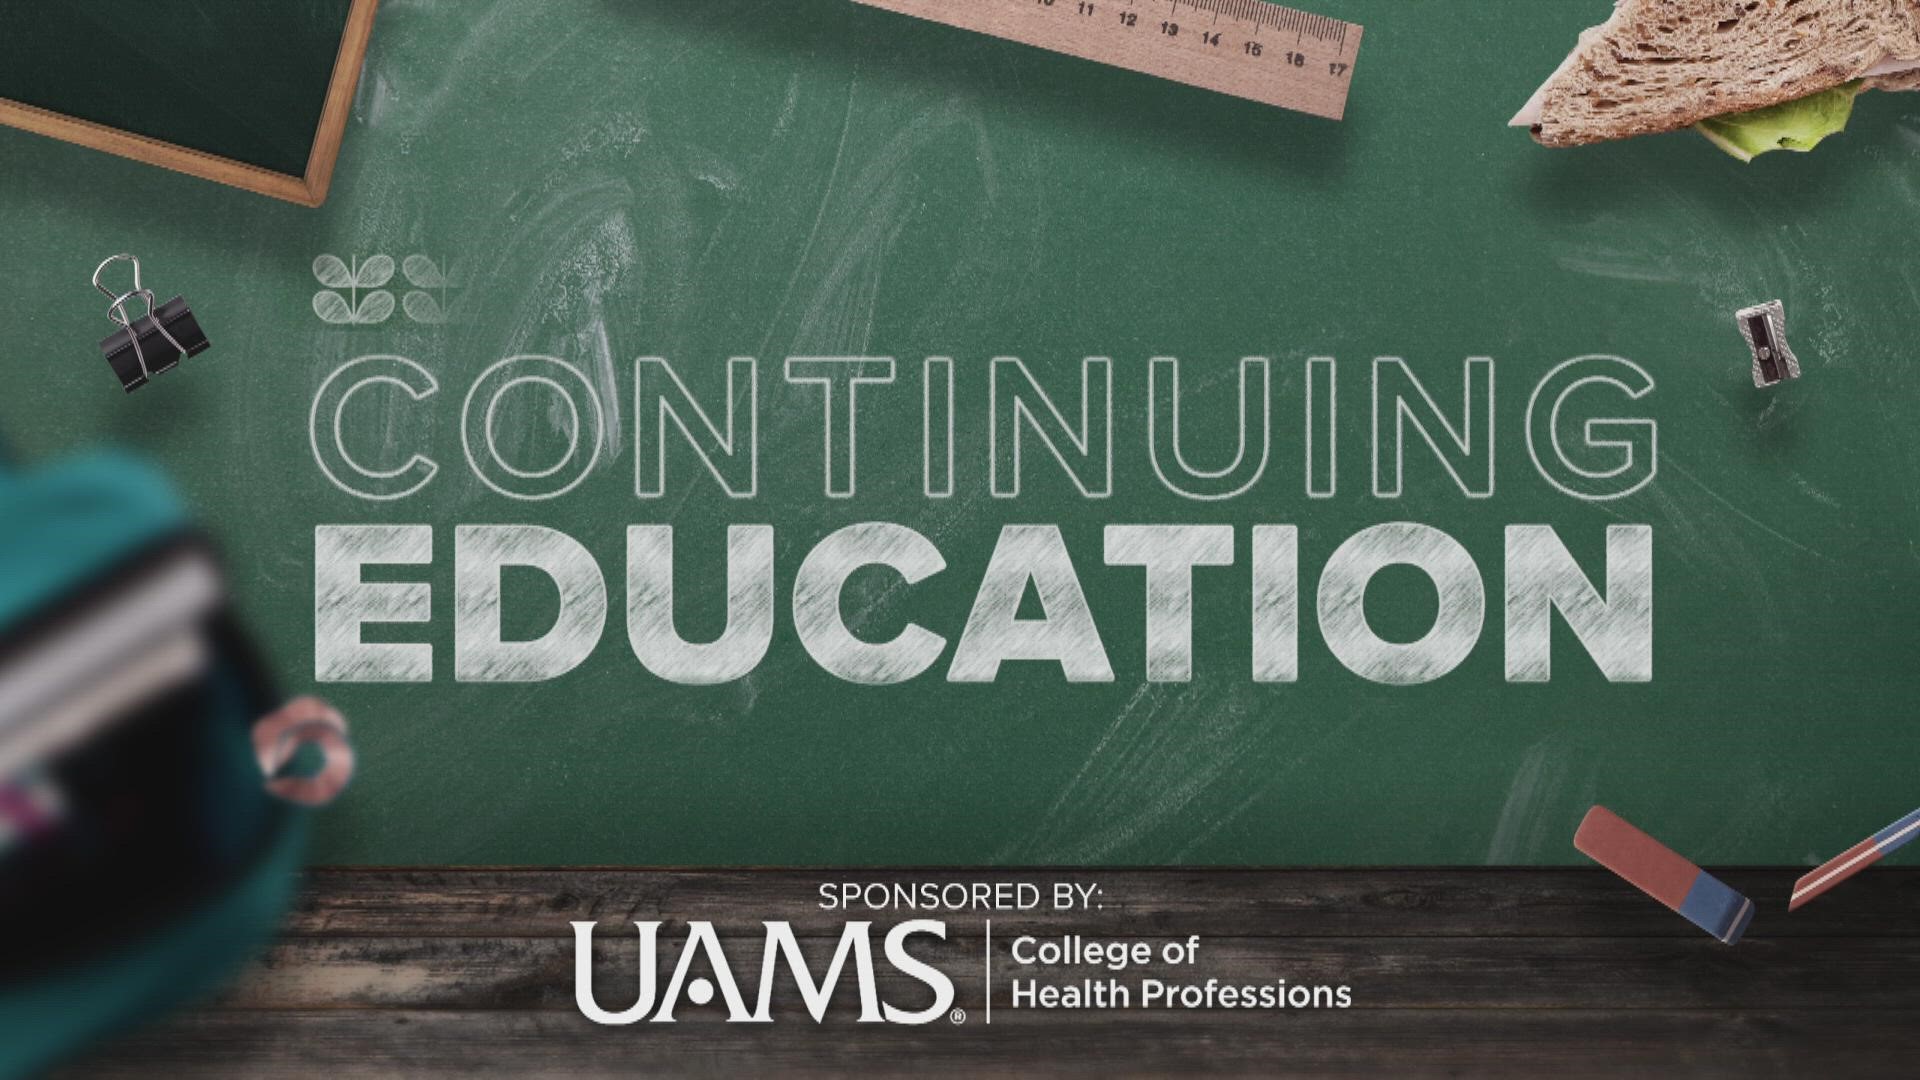 Learn more at: healthprofessions.uams.edu